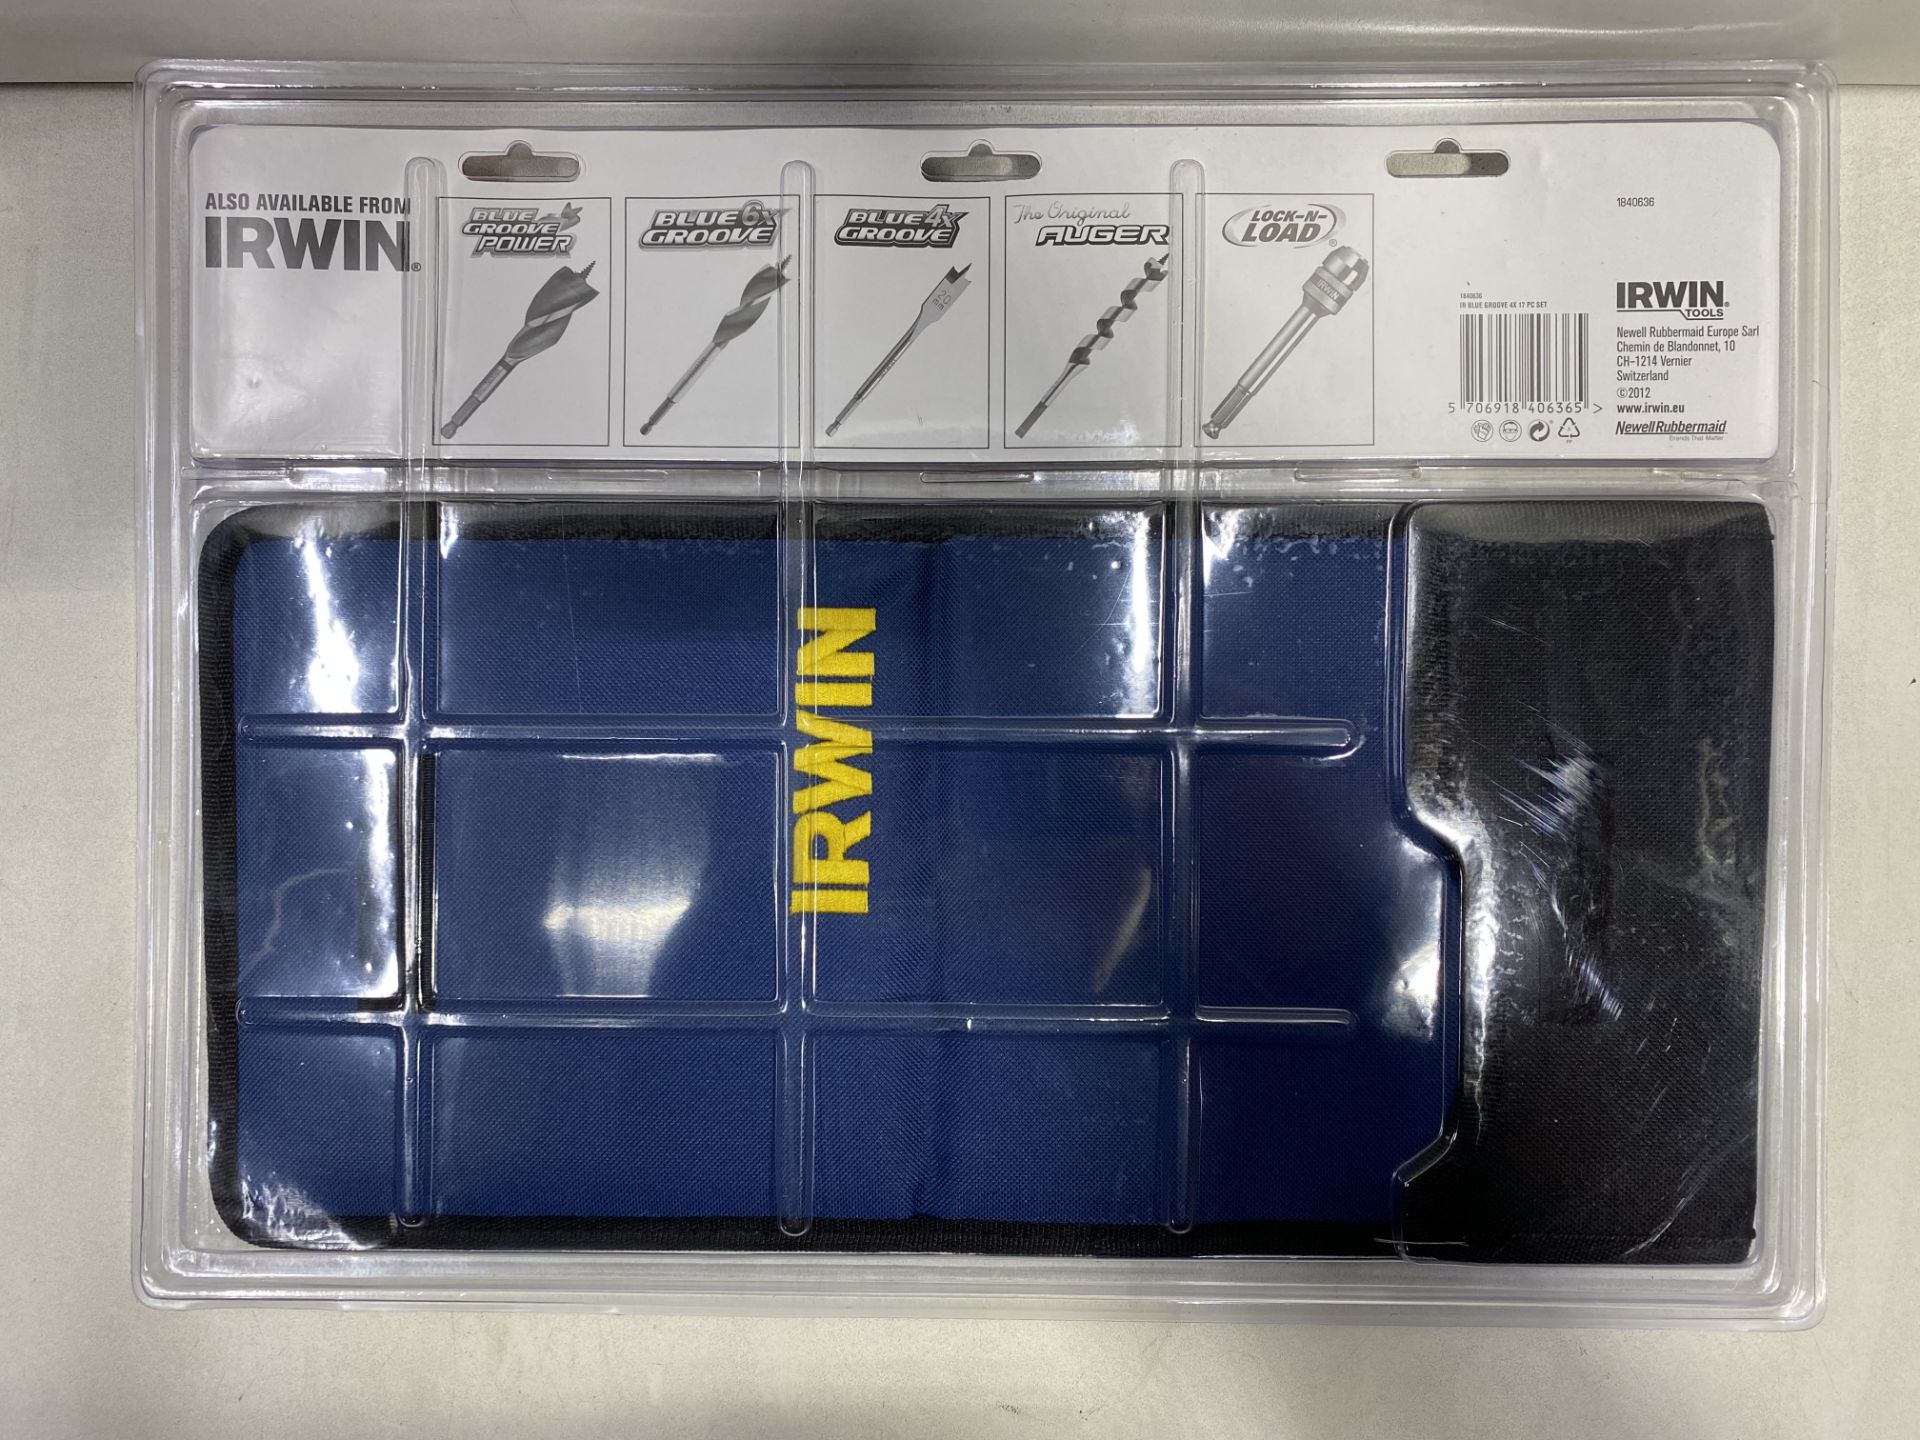 3 x Sets of Irwin Blue Groove 17 Piece Flat Spade Drill Bits | IRW1840636 | Total RRP £72 - Image 3 of 3